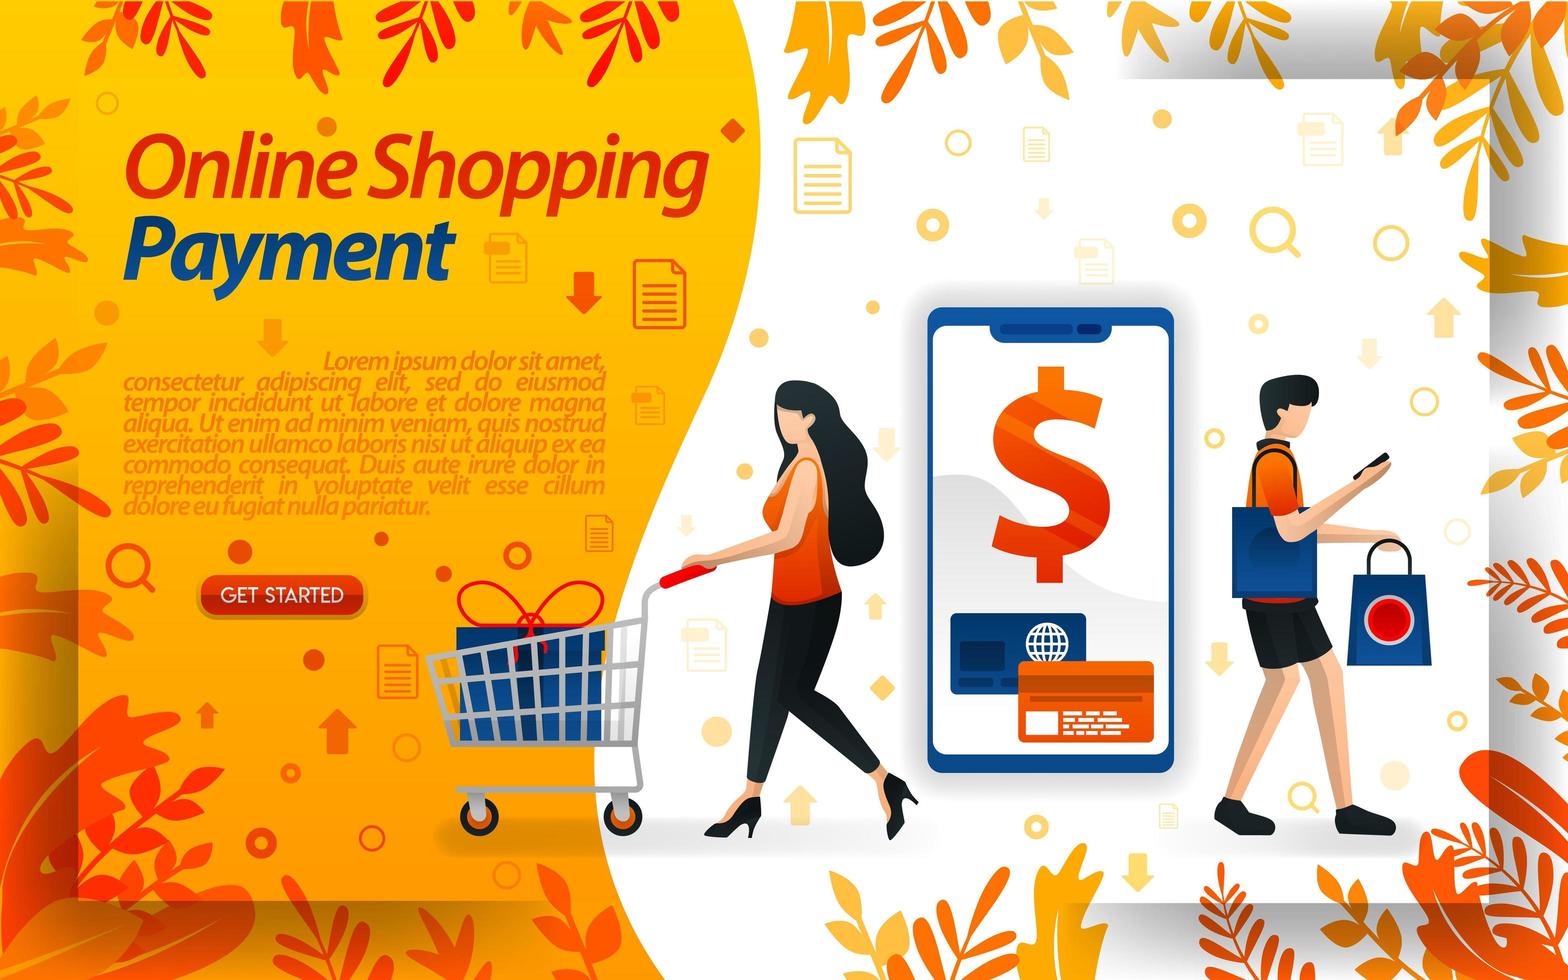 Online Payment Methods for e-commerce. online shopping payments using smartphones and credit cards, vector ilustration. can use for, landing page, template, ui, web, mobile app, poster, banner, flayer